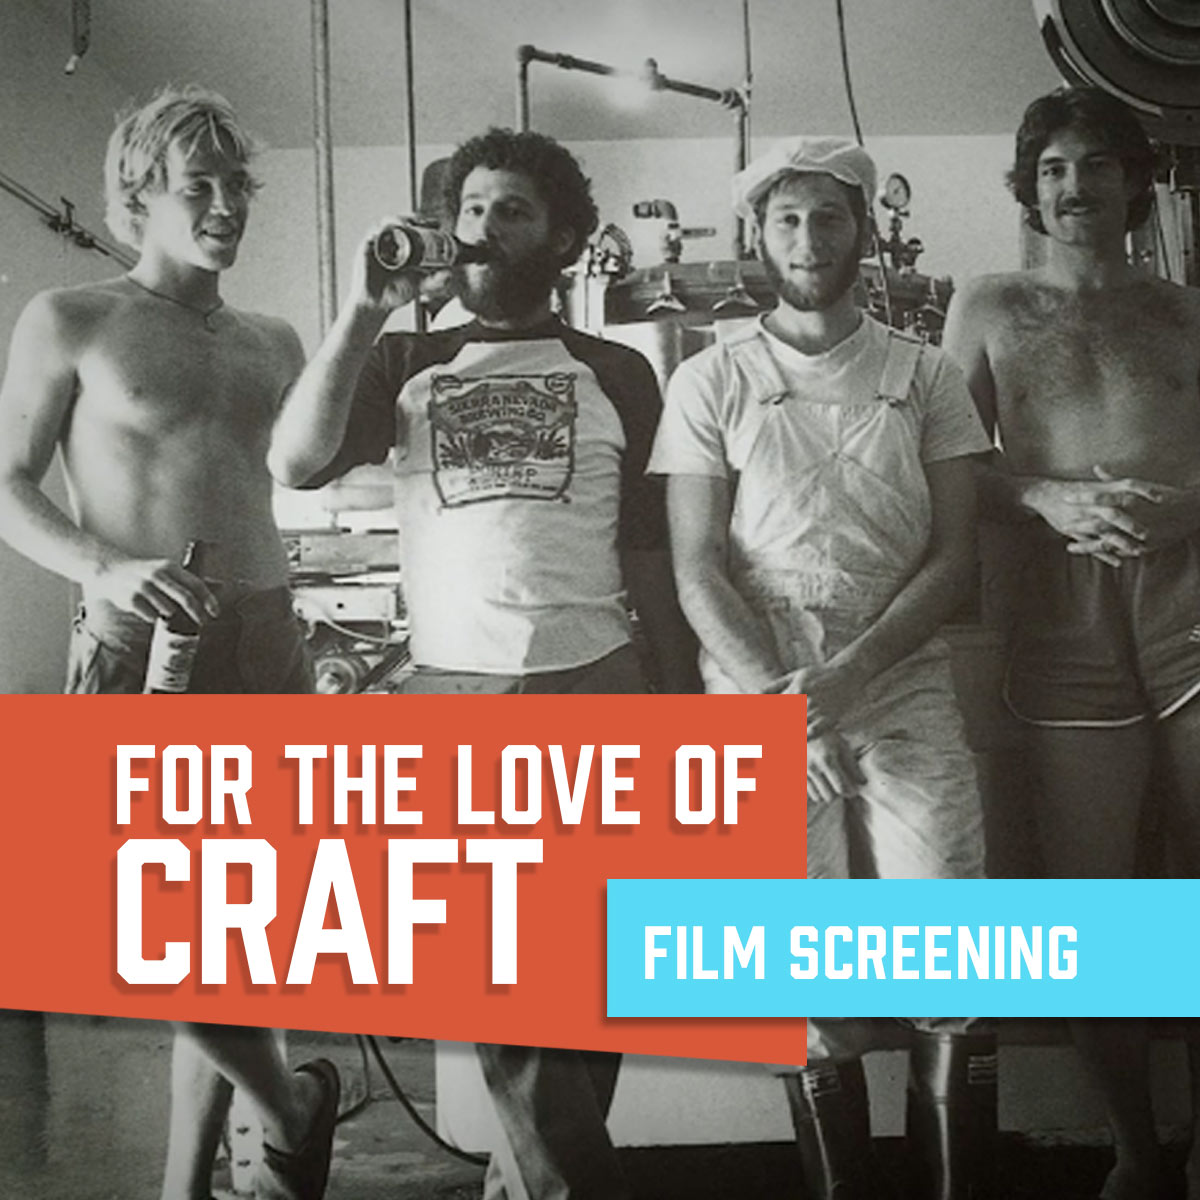 Documentary Screening 'For the Love of Craft' & Beer Panel coming up! Get your tickets on our App! Find out more https://bit.ly/384mpEB! #partywithpsb #craftbeer #beerhistory